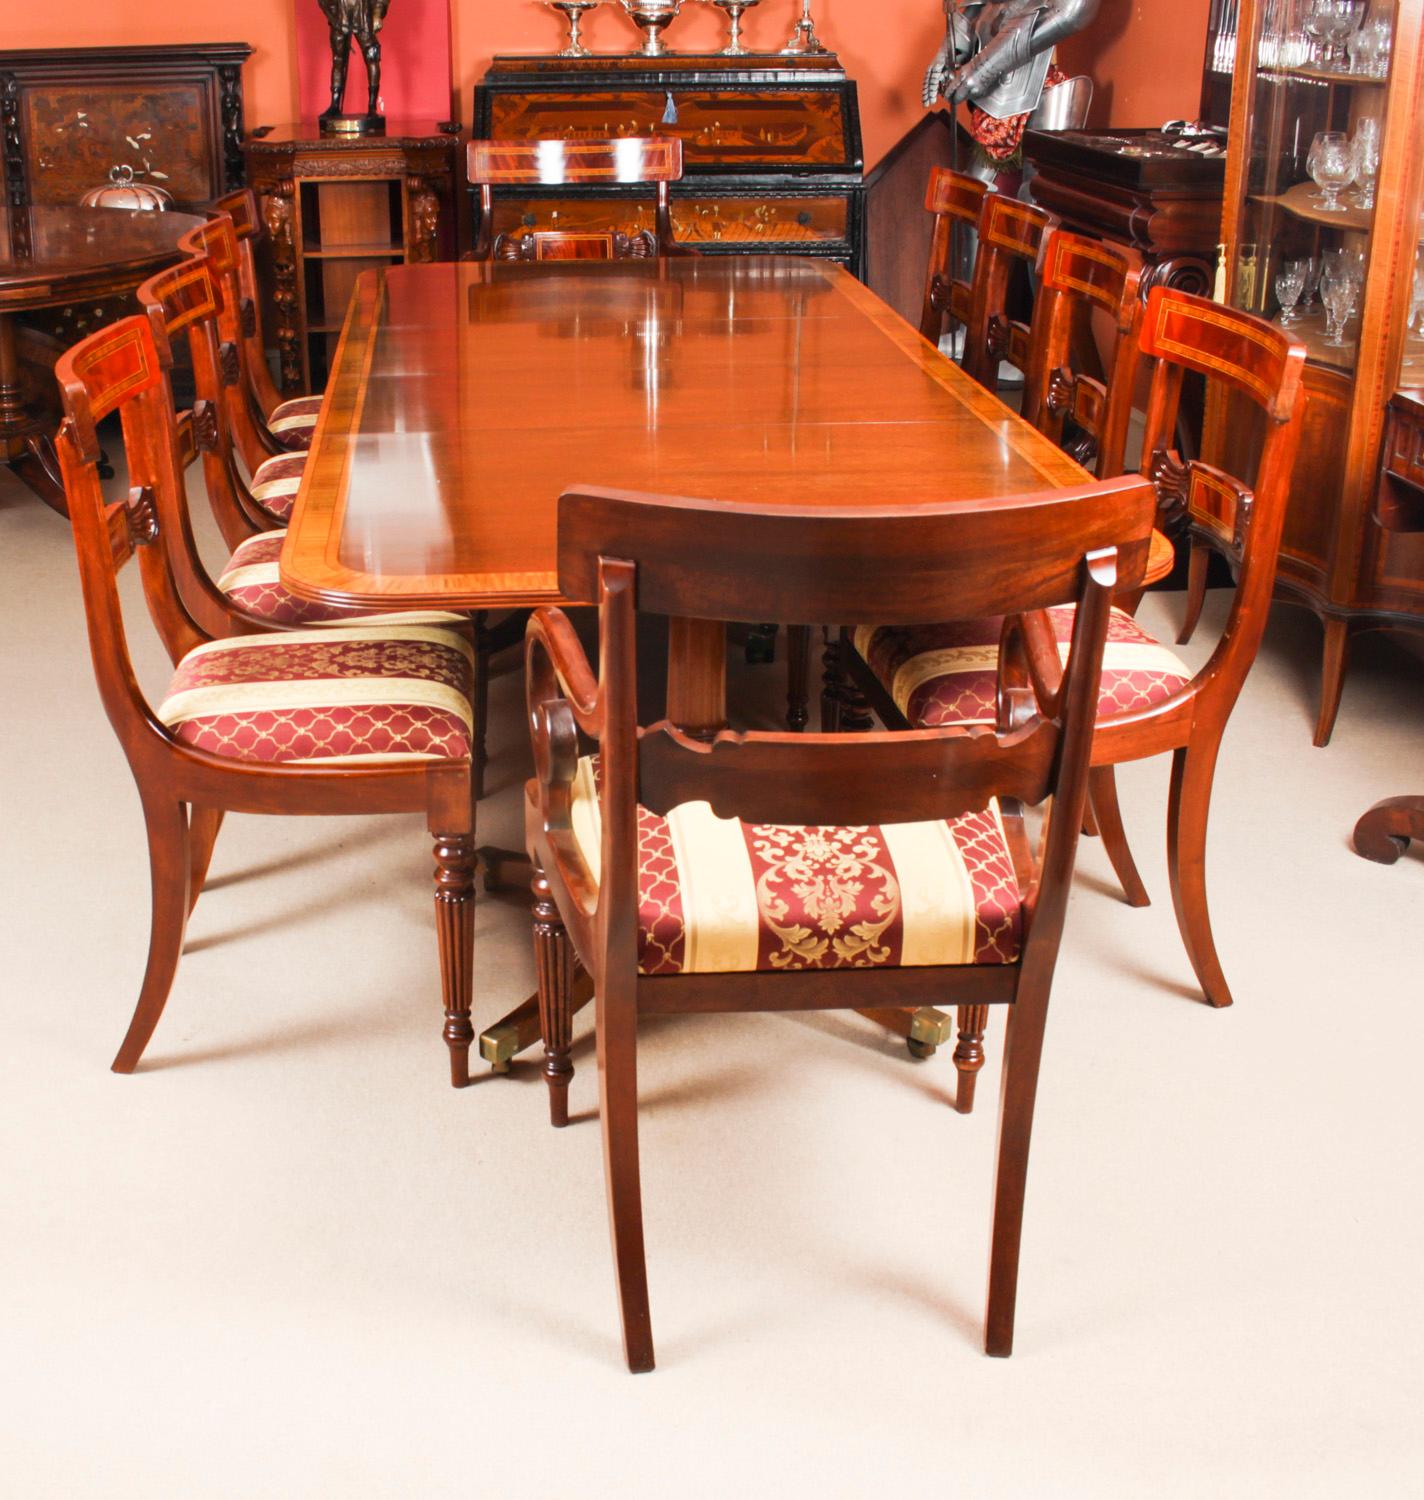 This is fabulous Vintage Regency Revival dining table by the master cabinet maker William Tillman Circa 1980 in date with a set of ten Regency Revival dining chairs.

The table is made of stunning solid flame mahogany with satinwood crossbanding and